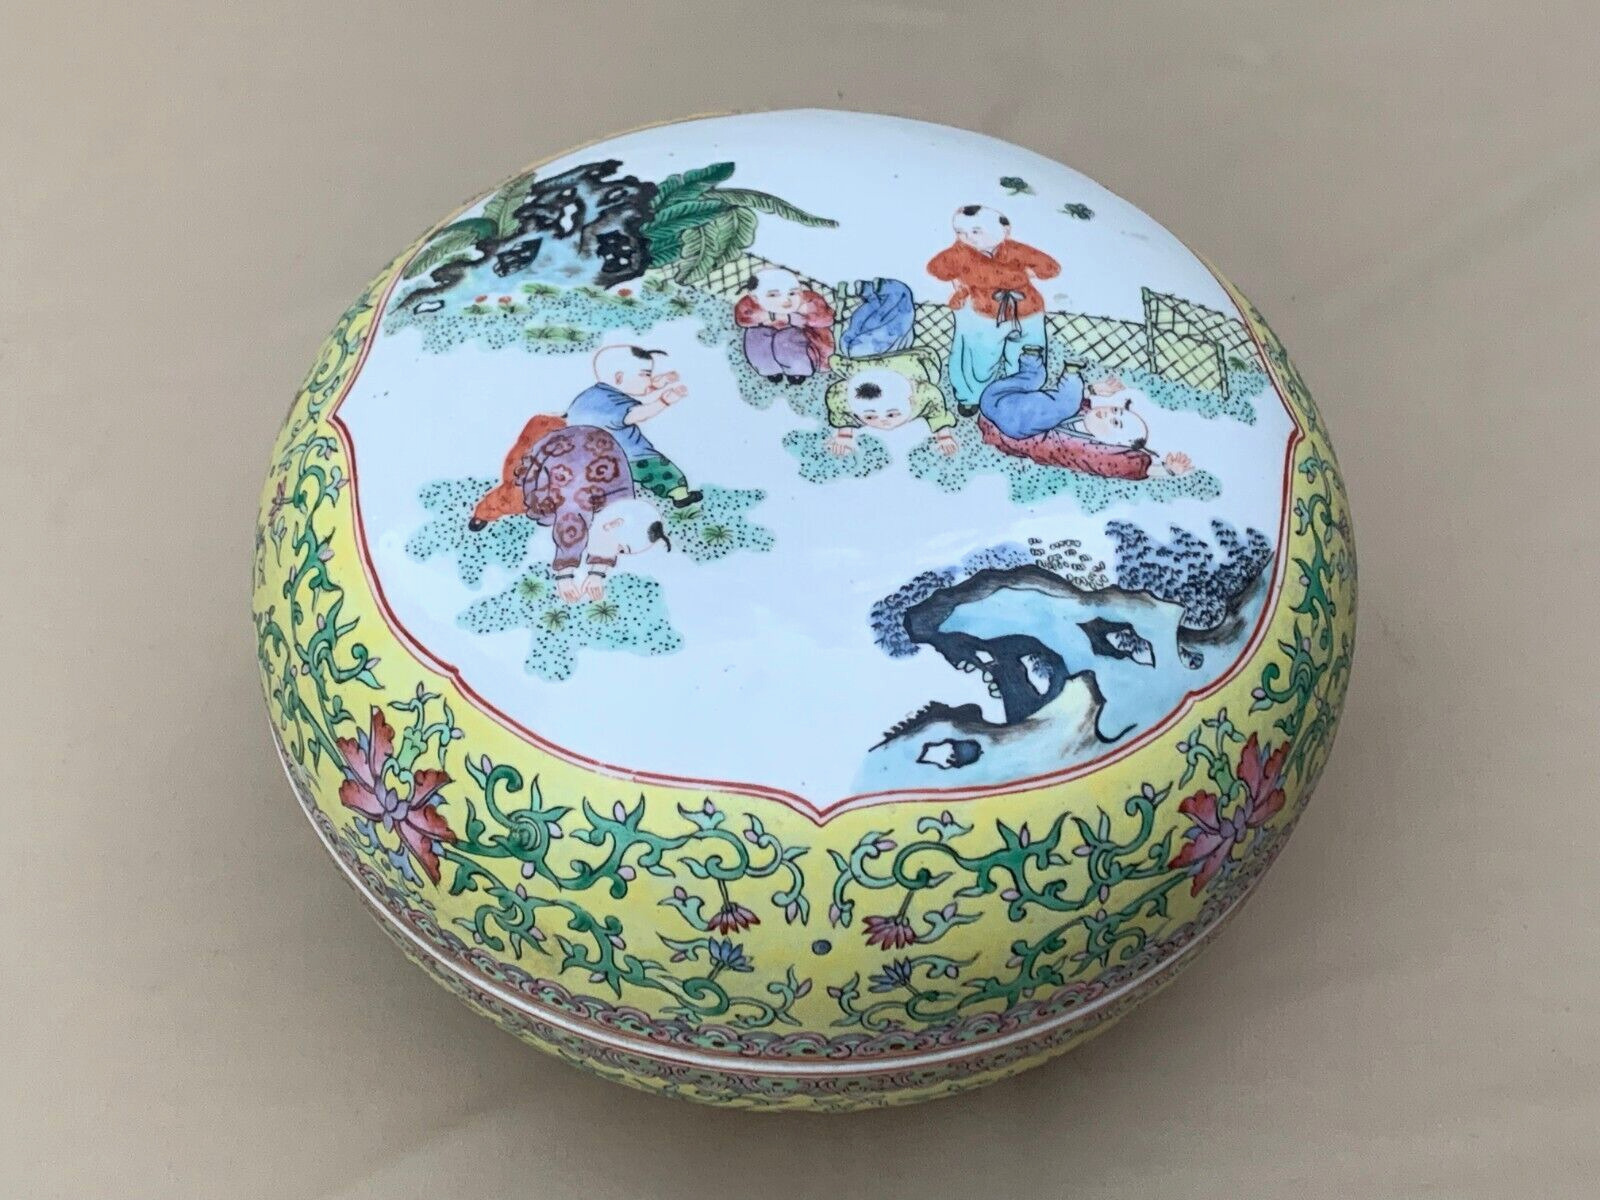 ROUND CHINESE ASIAN PORCELAIN BOX WITH COVER HAND PAINTED BOYS PLAYING BOWL VASE